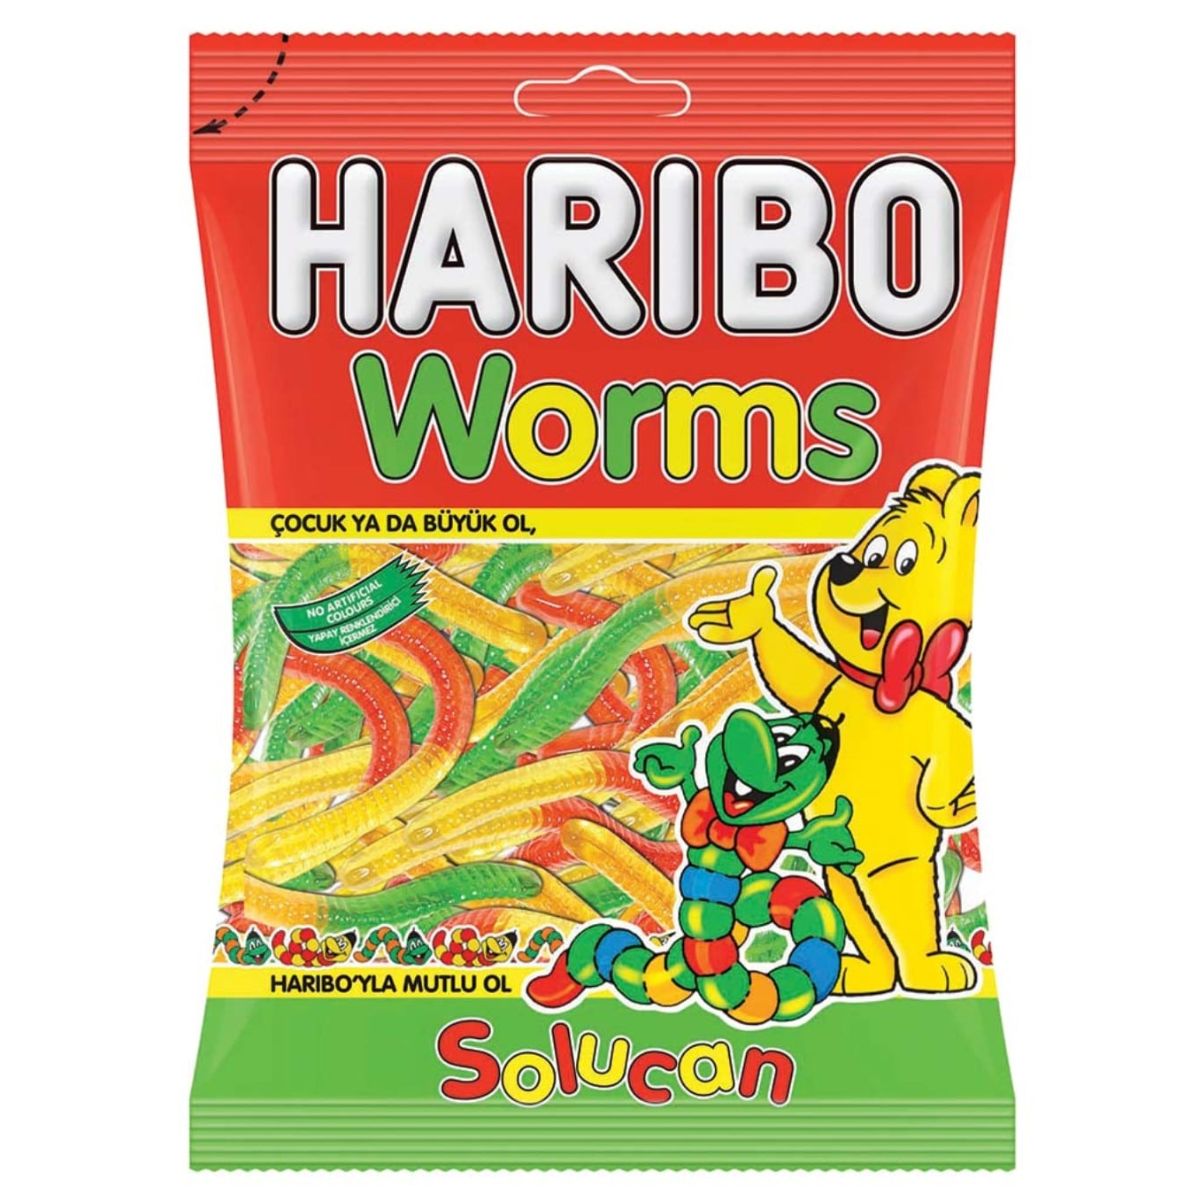 A bag of Haribo - Solucan Worms - 80g on a white background.